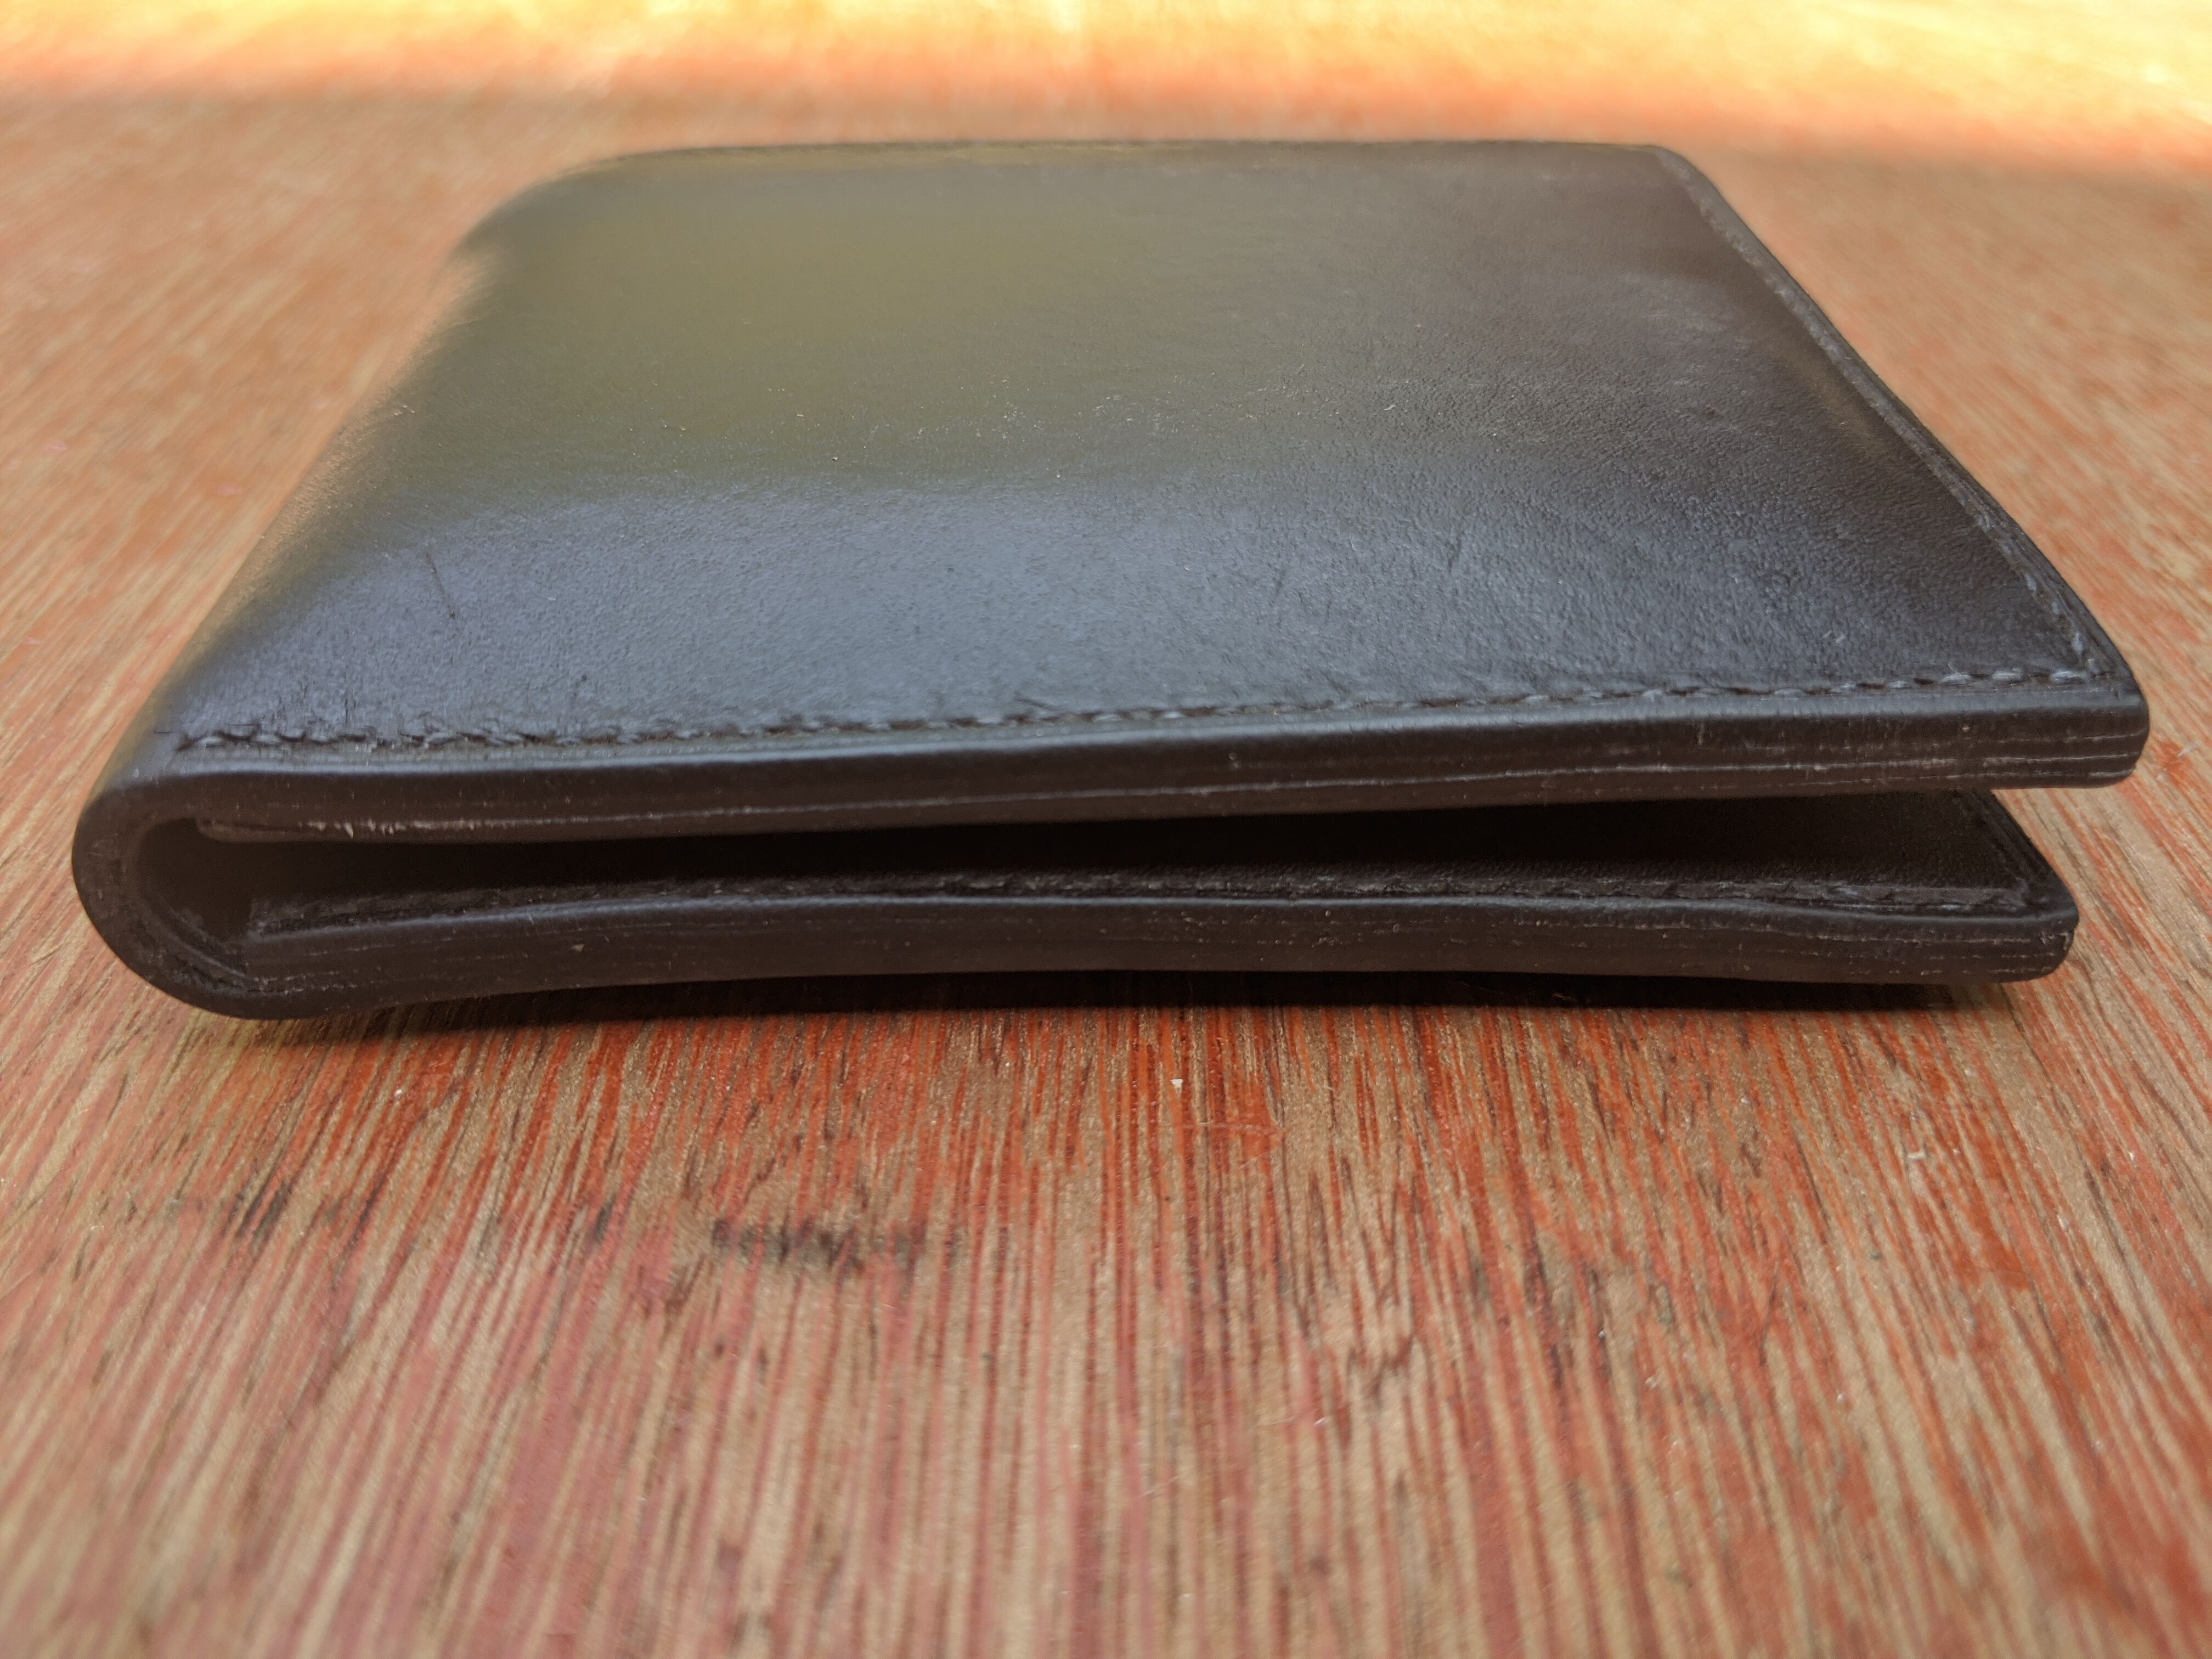 The bottom edges of the wallet.